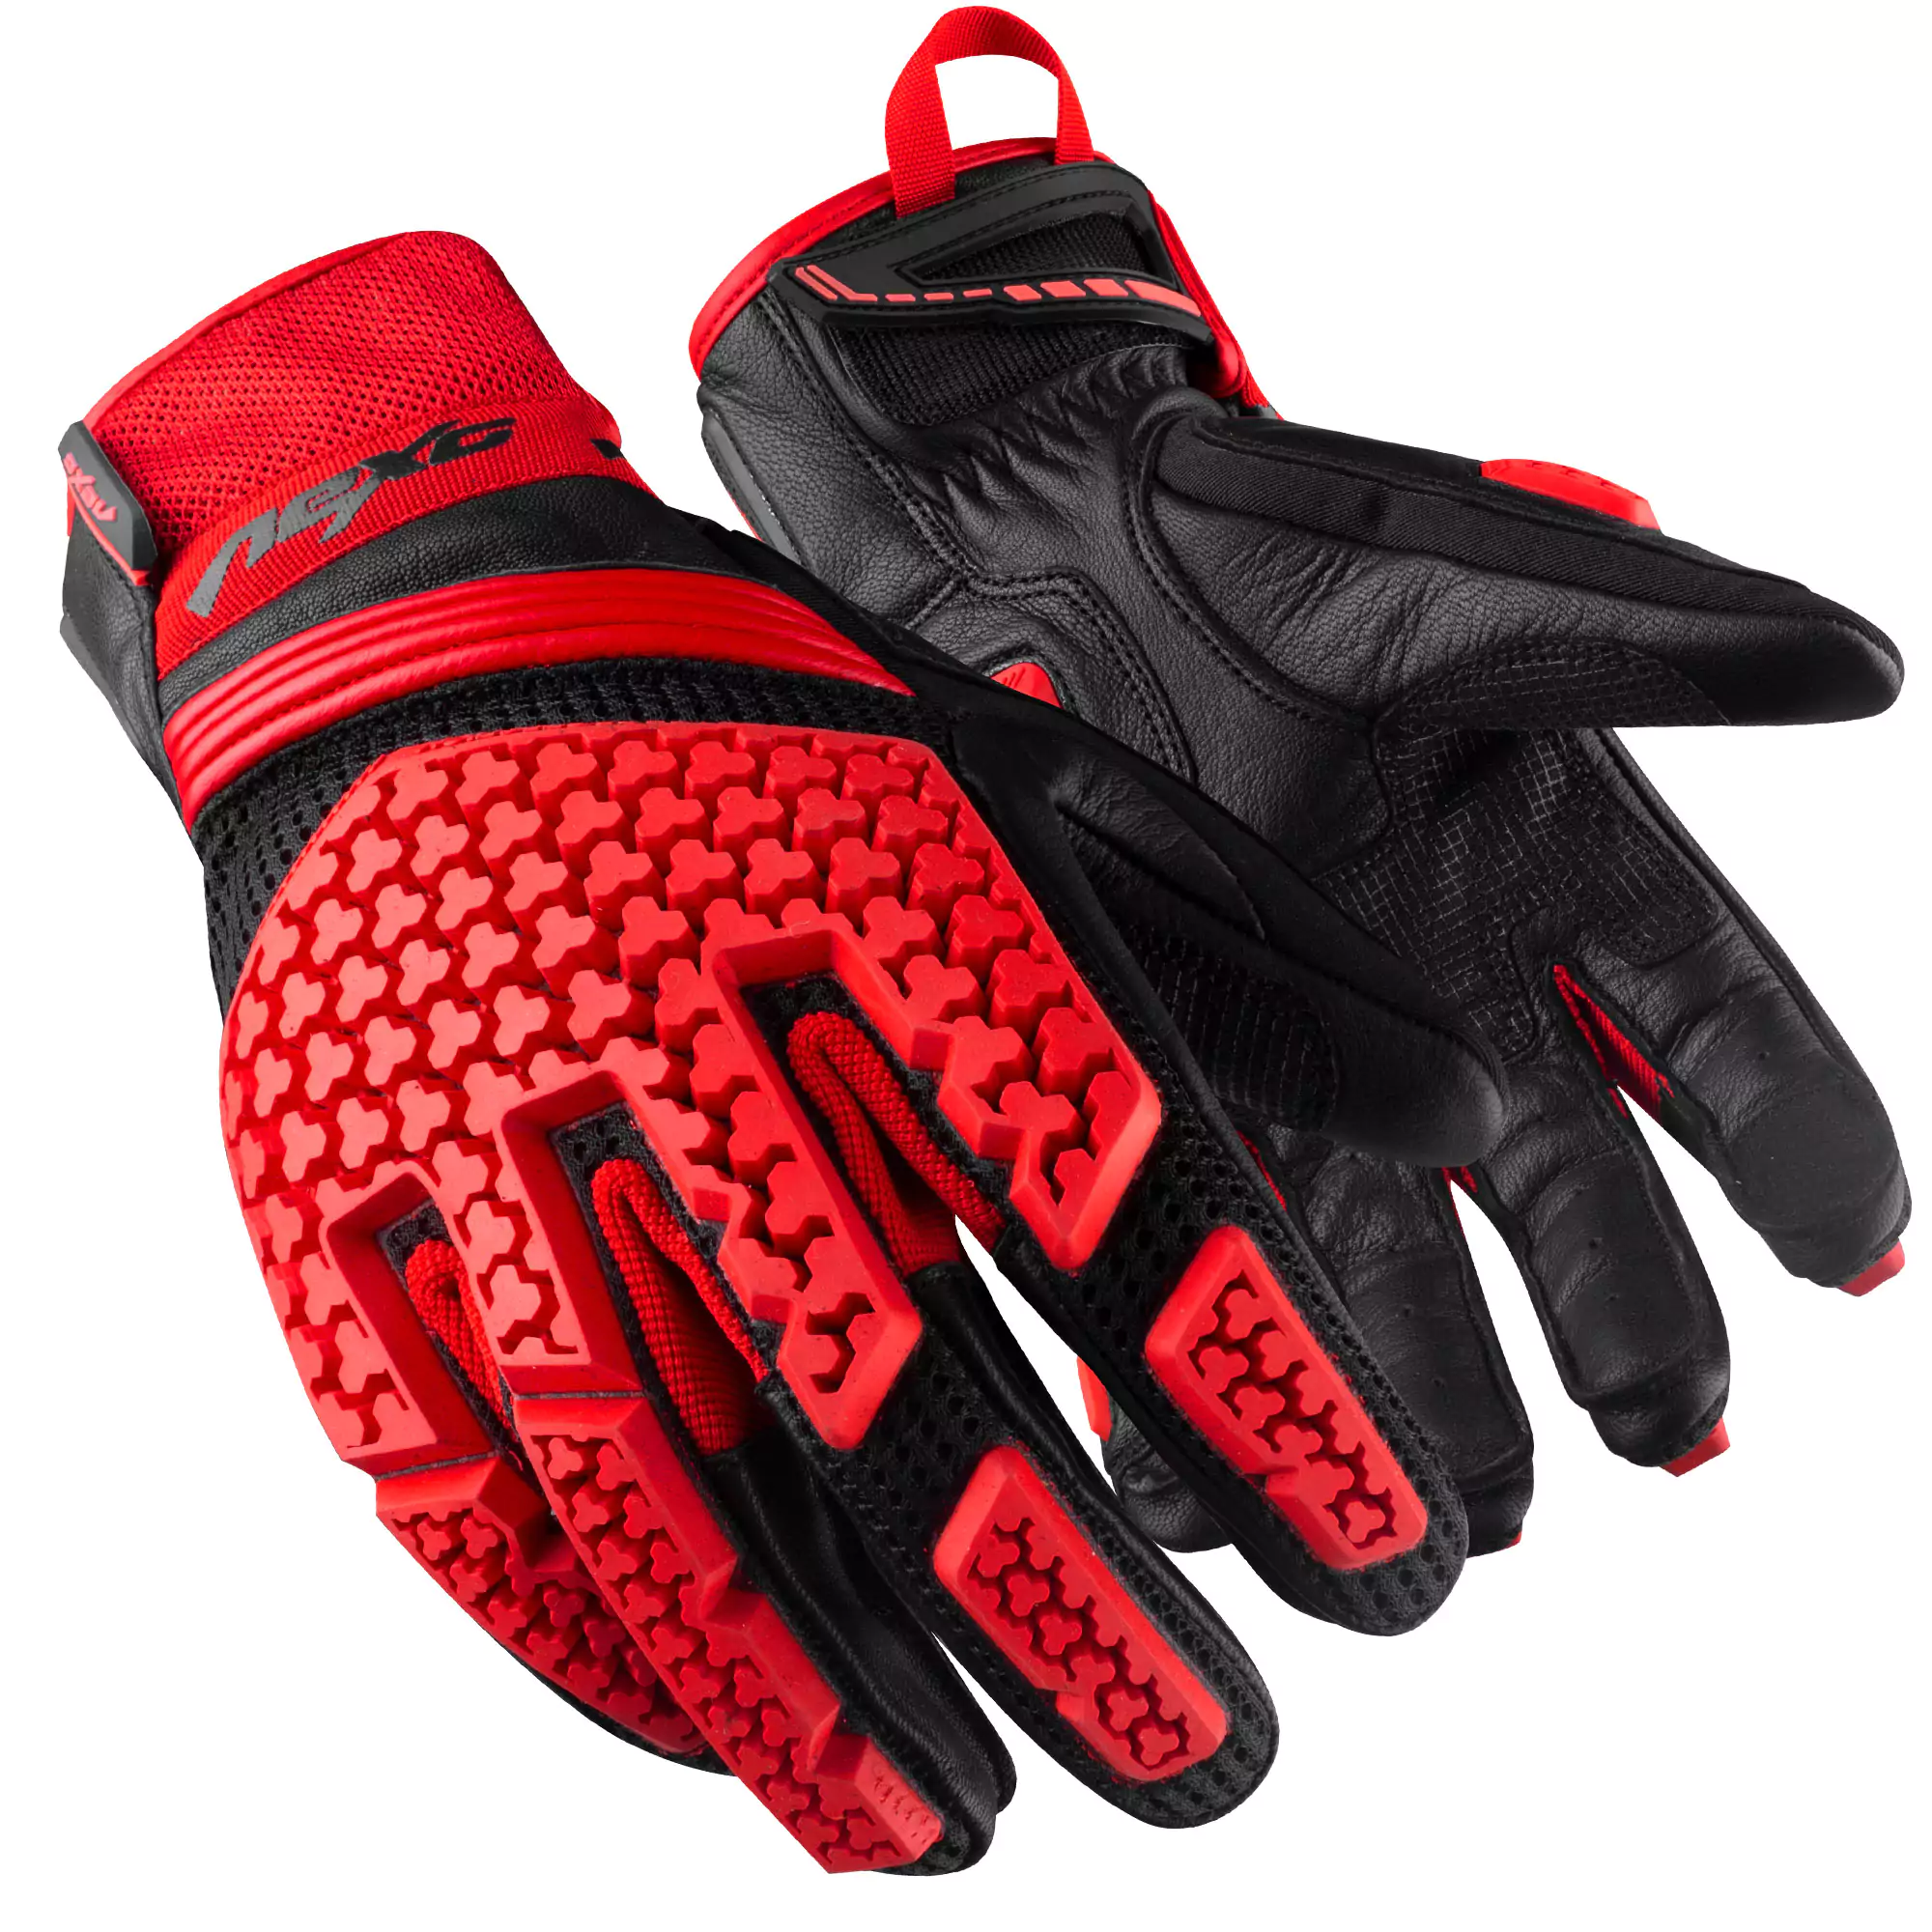 Pair of lightweight and breathable motorcycle motocross gloves designed for comfort and grip.